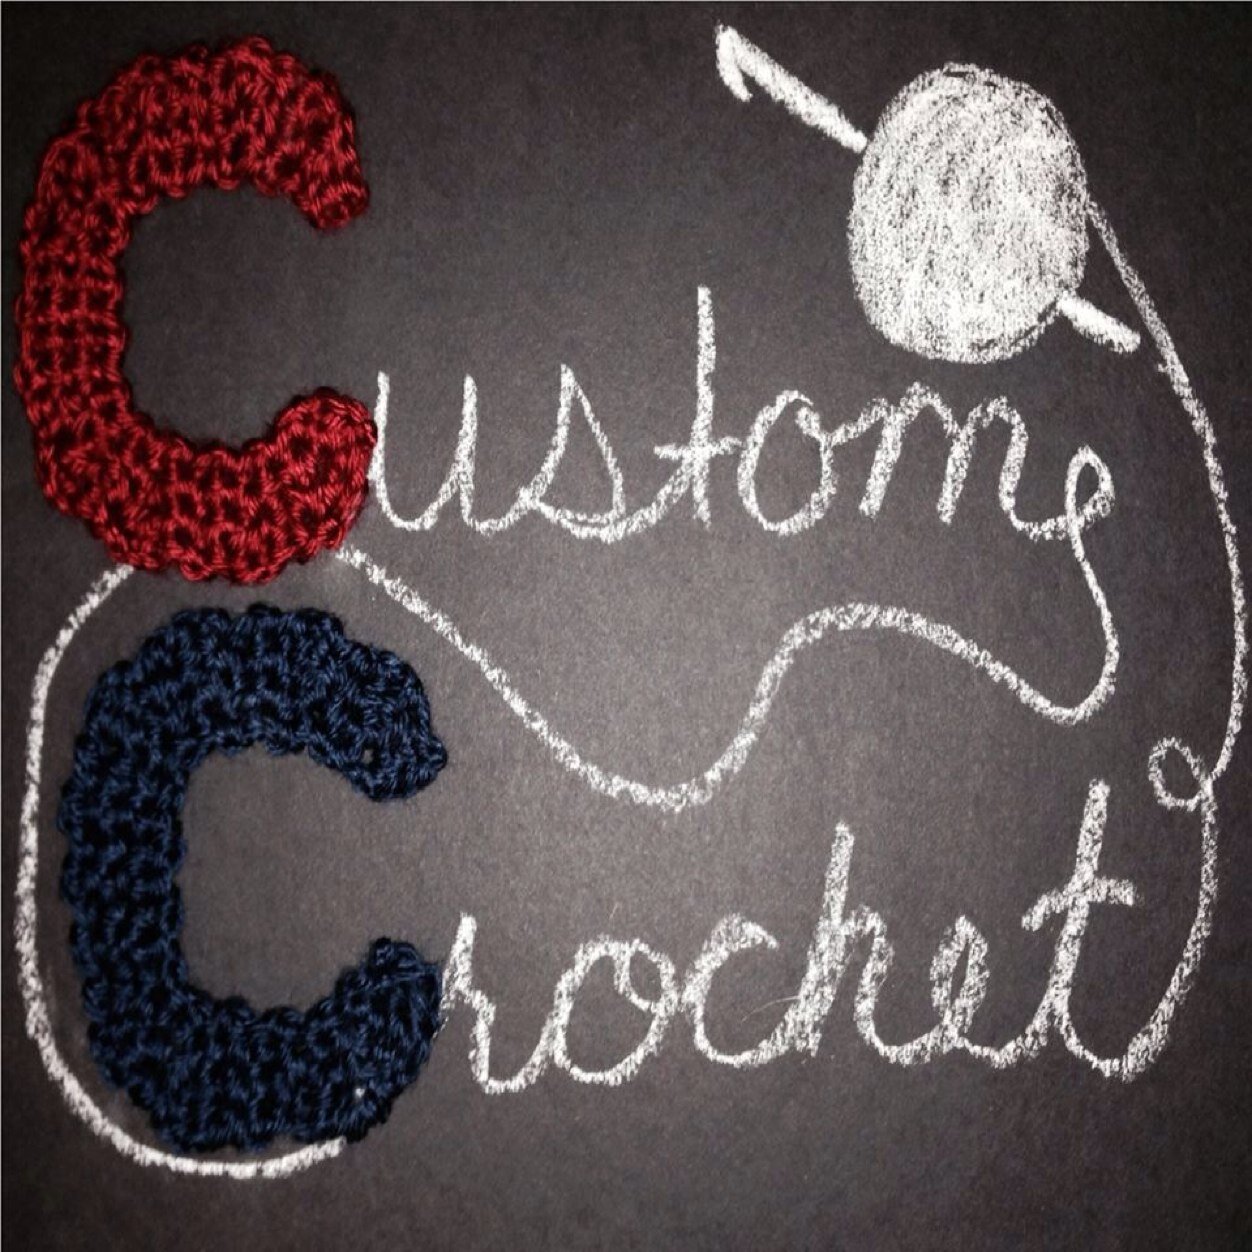 Selling my handmade crocheted accessories! :)